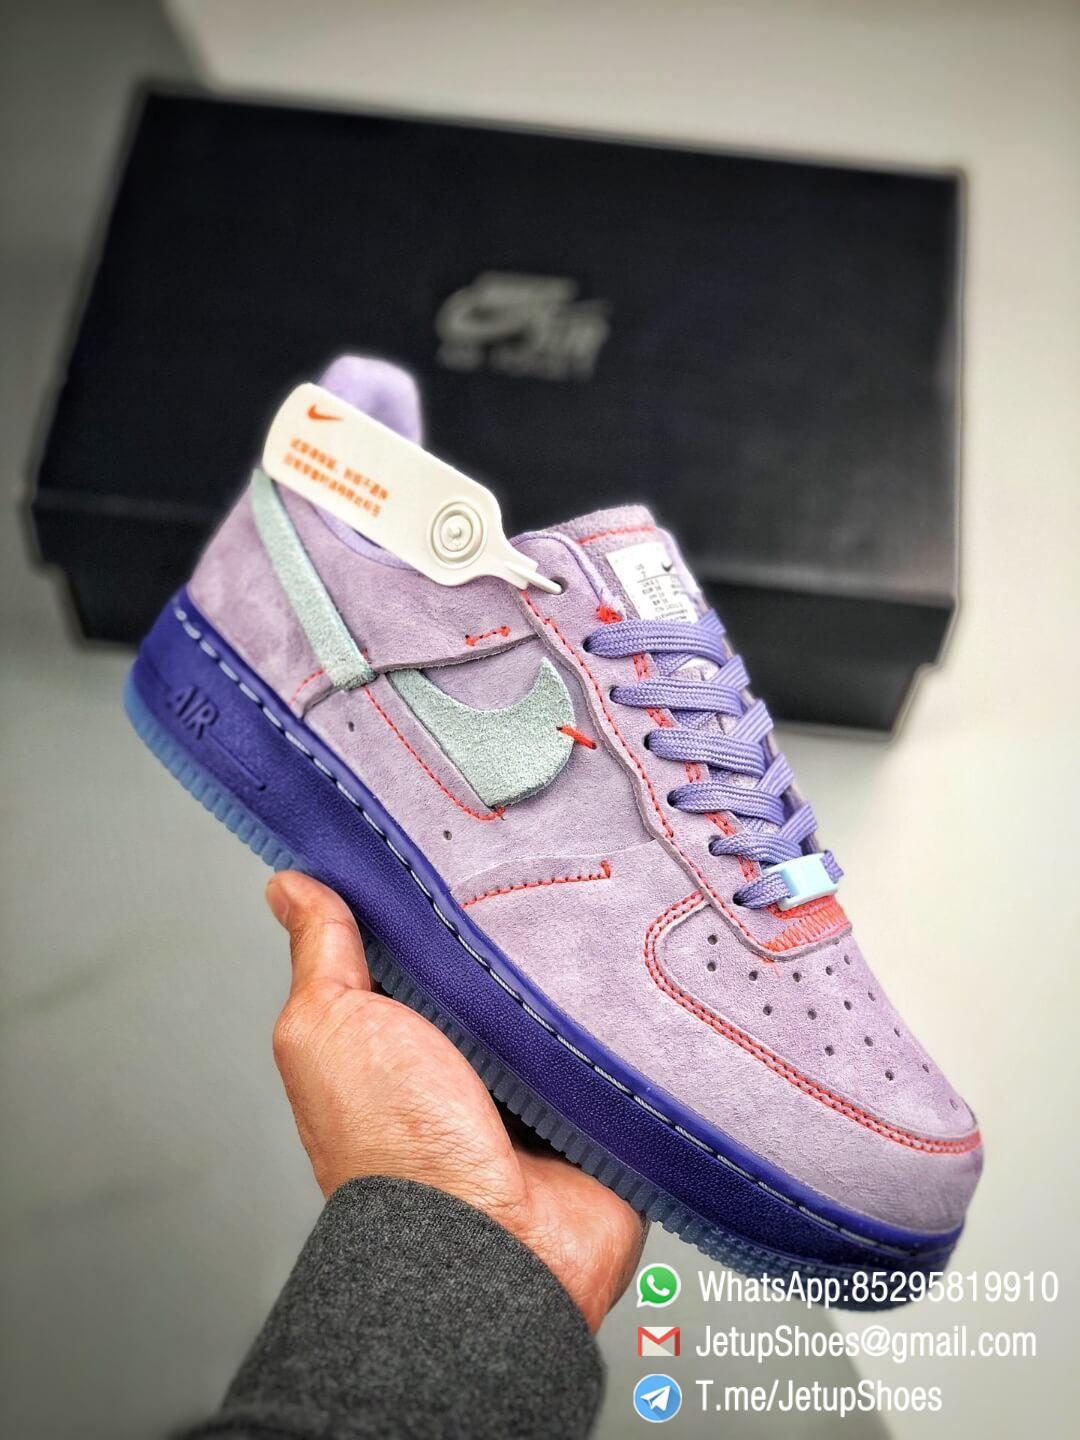 The Nike Wmns Air Force 1 Low LX Purple Agate Suede Upper Orange Stitches Ocean Blue Outsoles Repsneaker 01